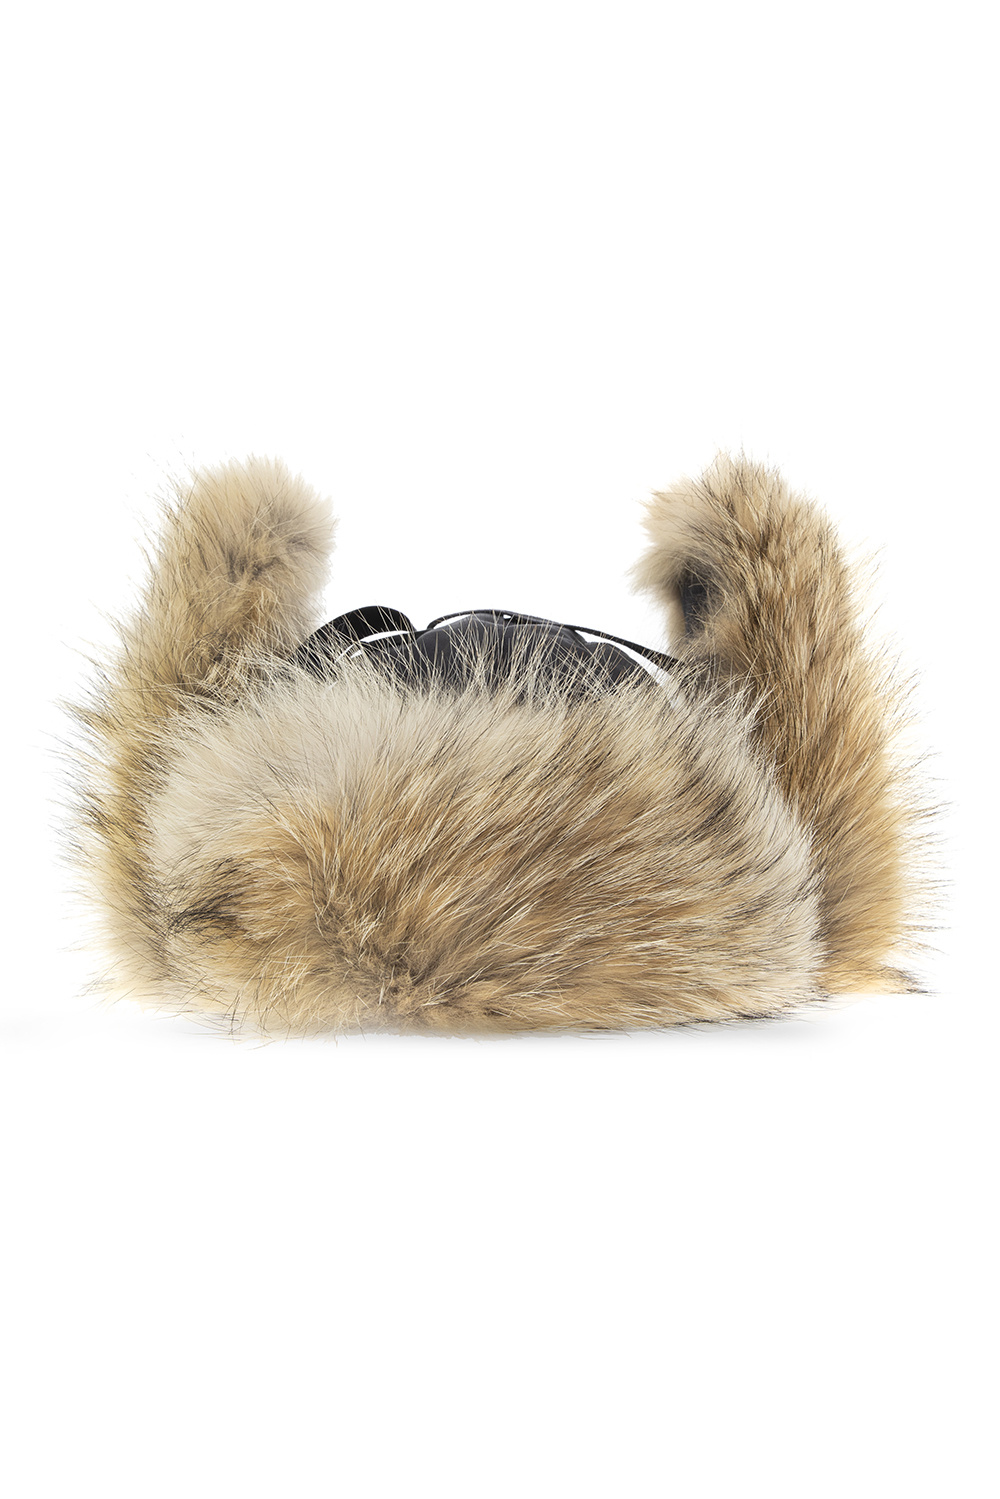 Canada Goose Hat with earmuffs